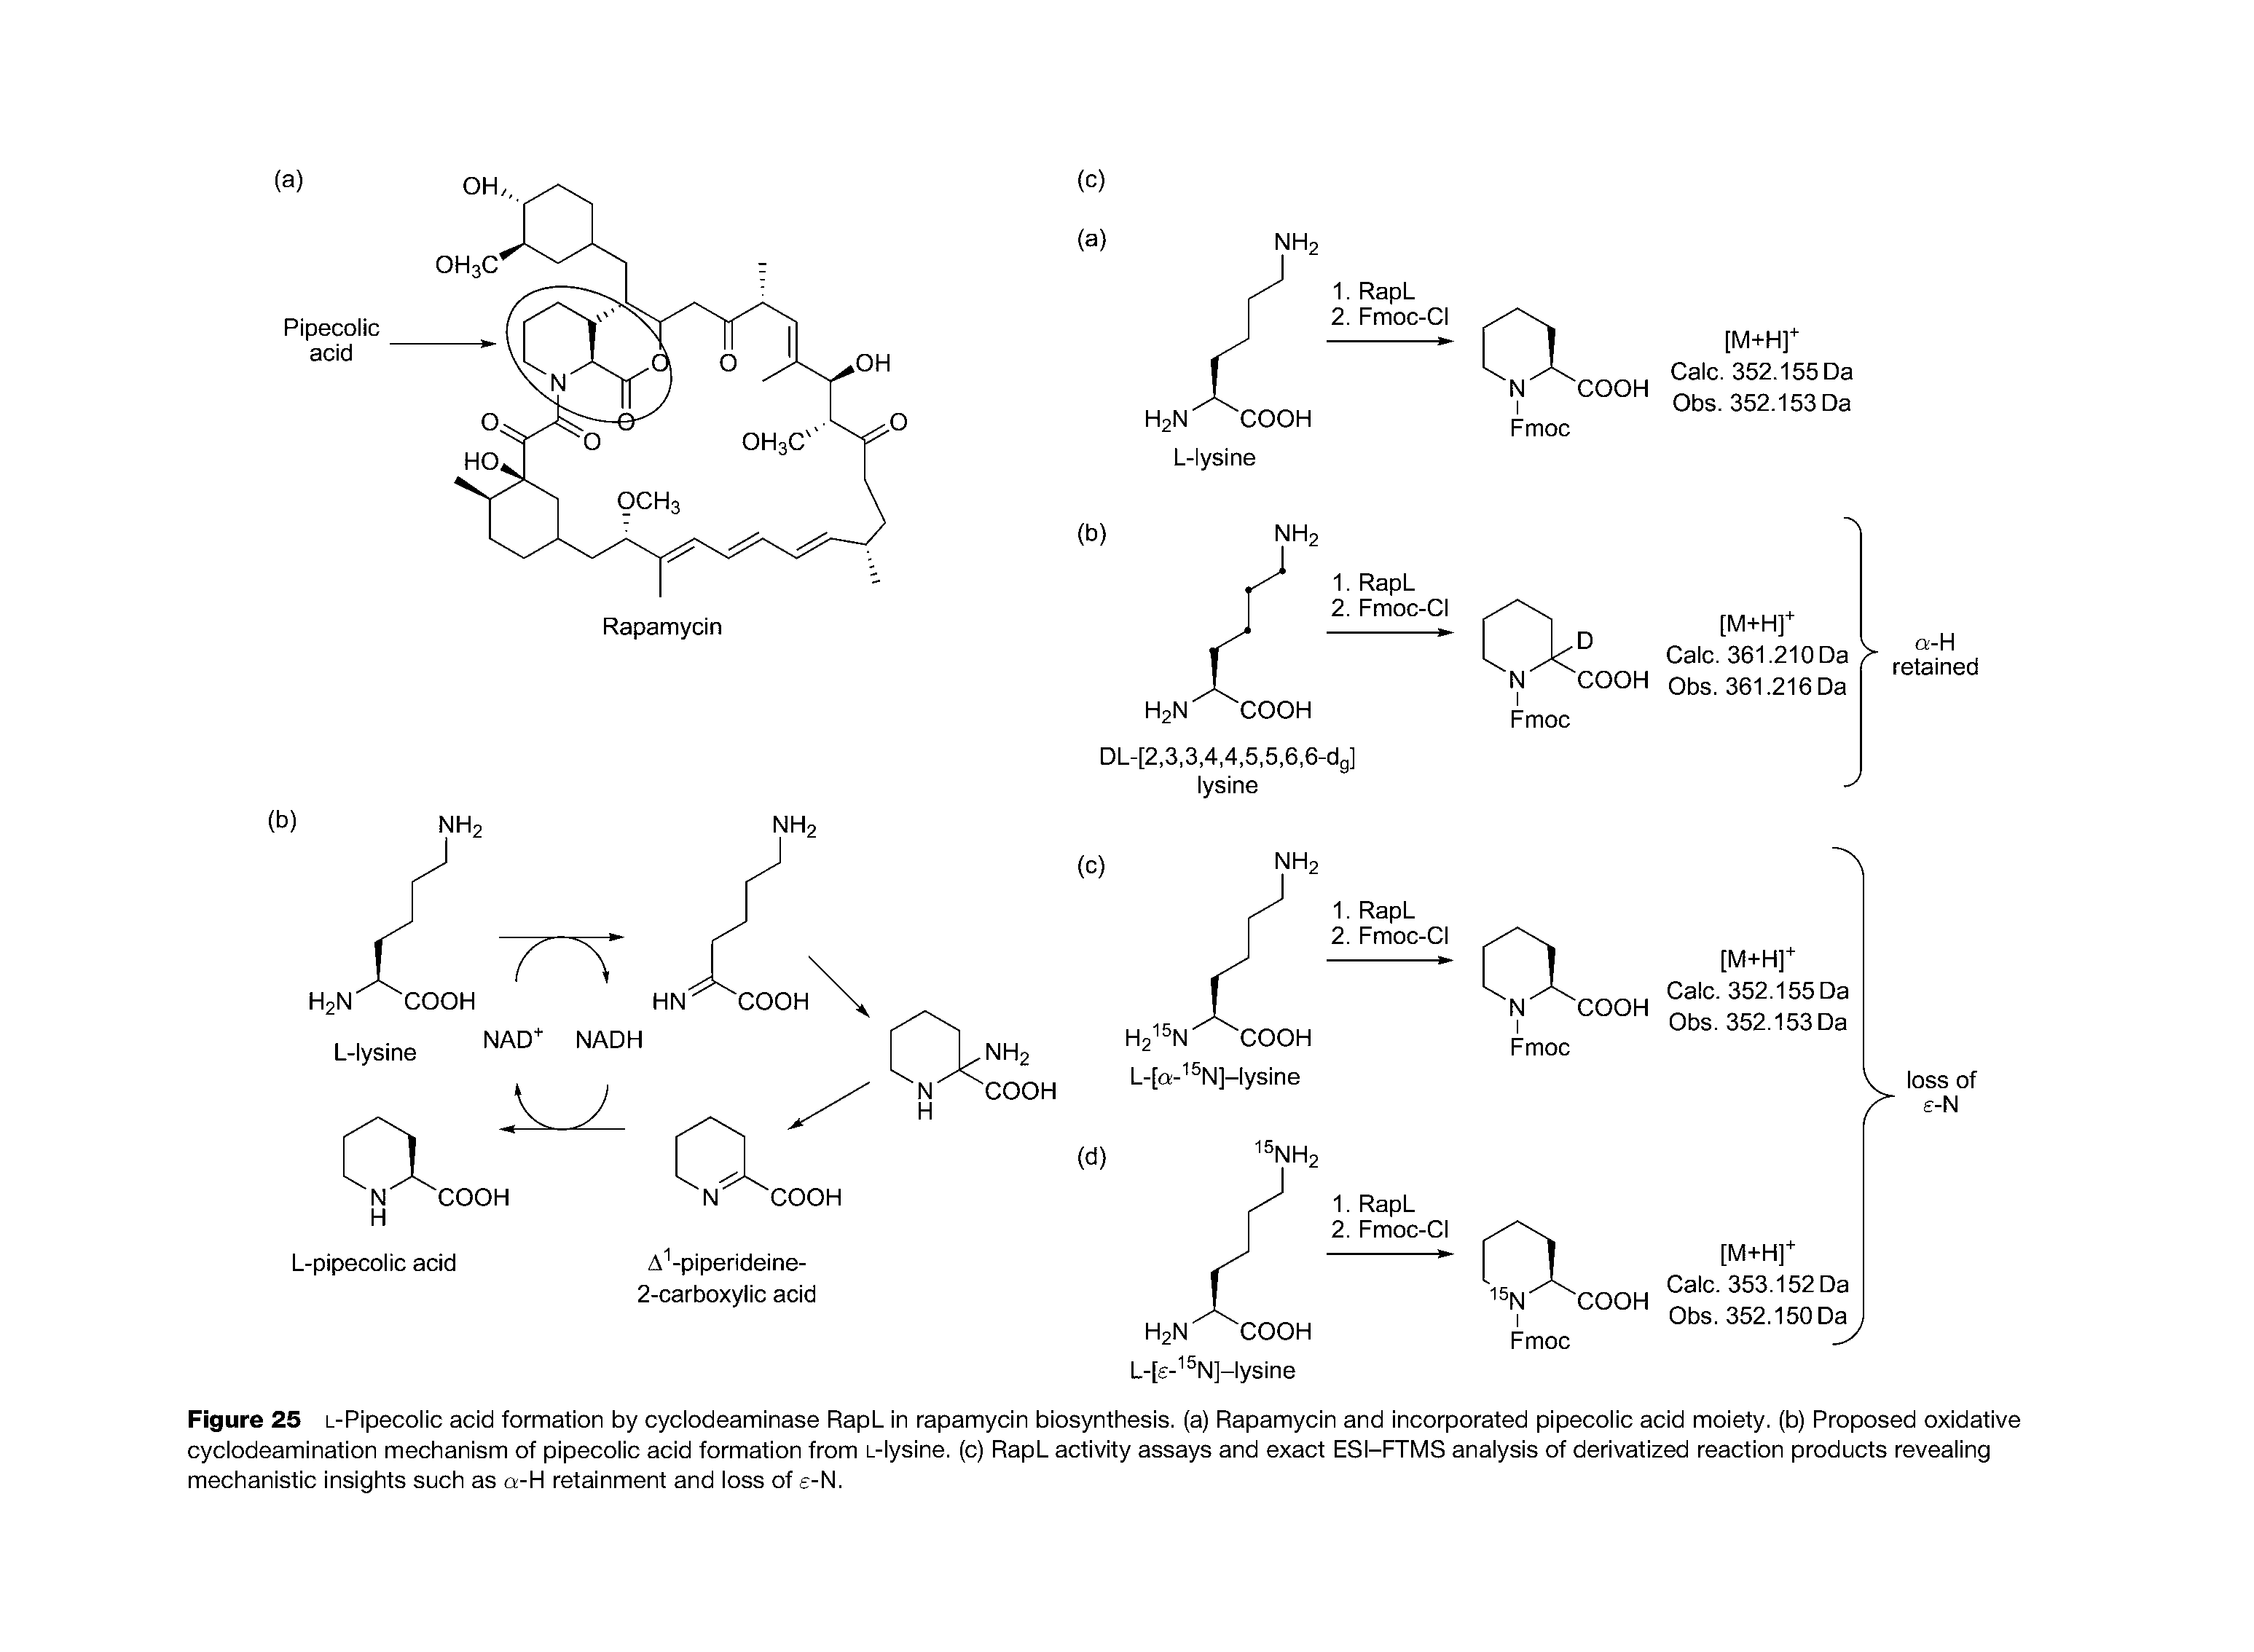 Figure 25 L-Pipecolic acid formation by cyclodeaminase RapL in rapamycin biosynthesis, (a) Rapamycin and incorporated pipecolic acid moiety, (b) Proposed oxidative cyclodeamination mechanism of pipecolic acid formation from L-lysine. (c) RapL activity assays and exact ESI-FTMS analysis of derivatized reaction products revealing mechanistic insights such as a-H retainment and loss of e-N.